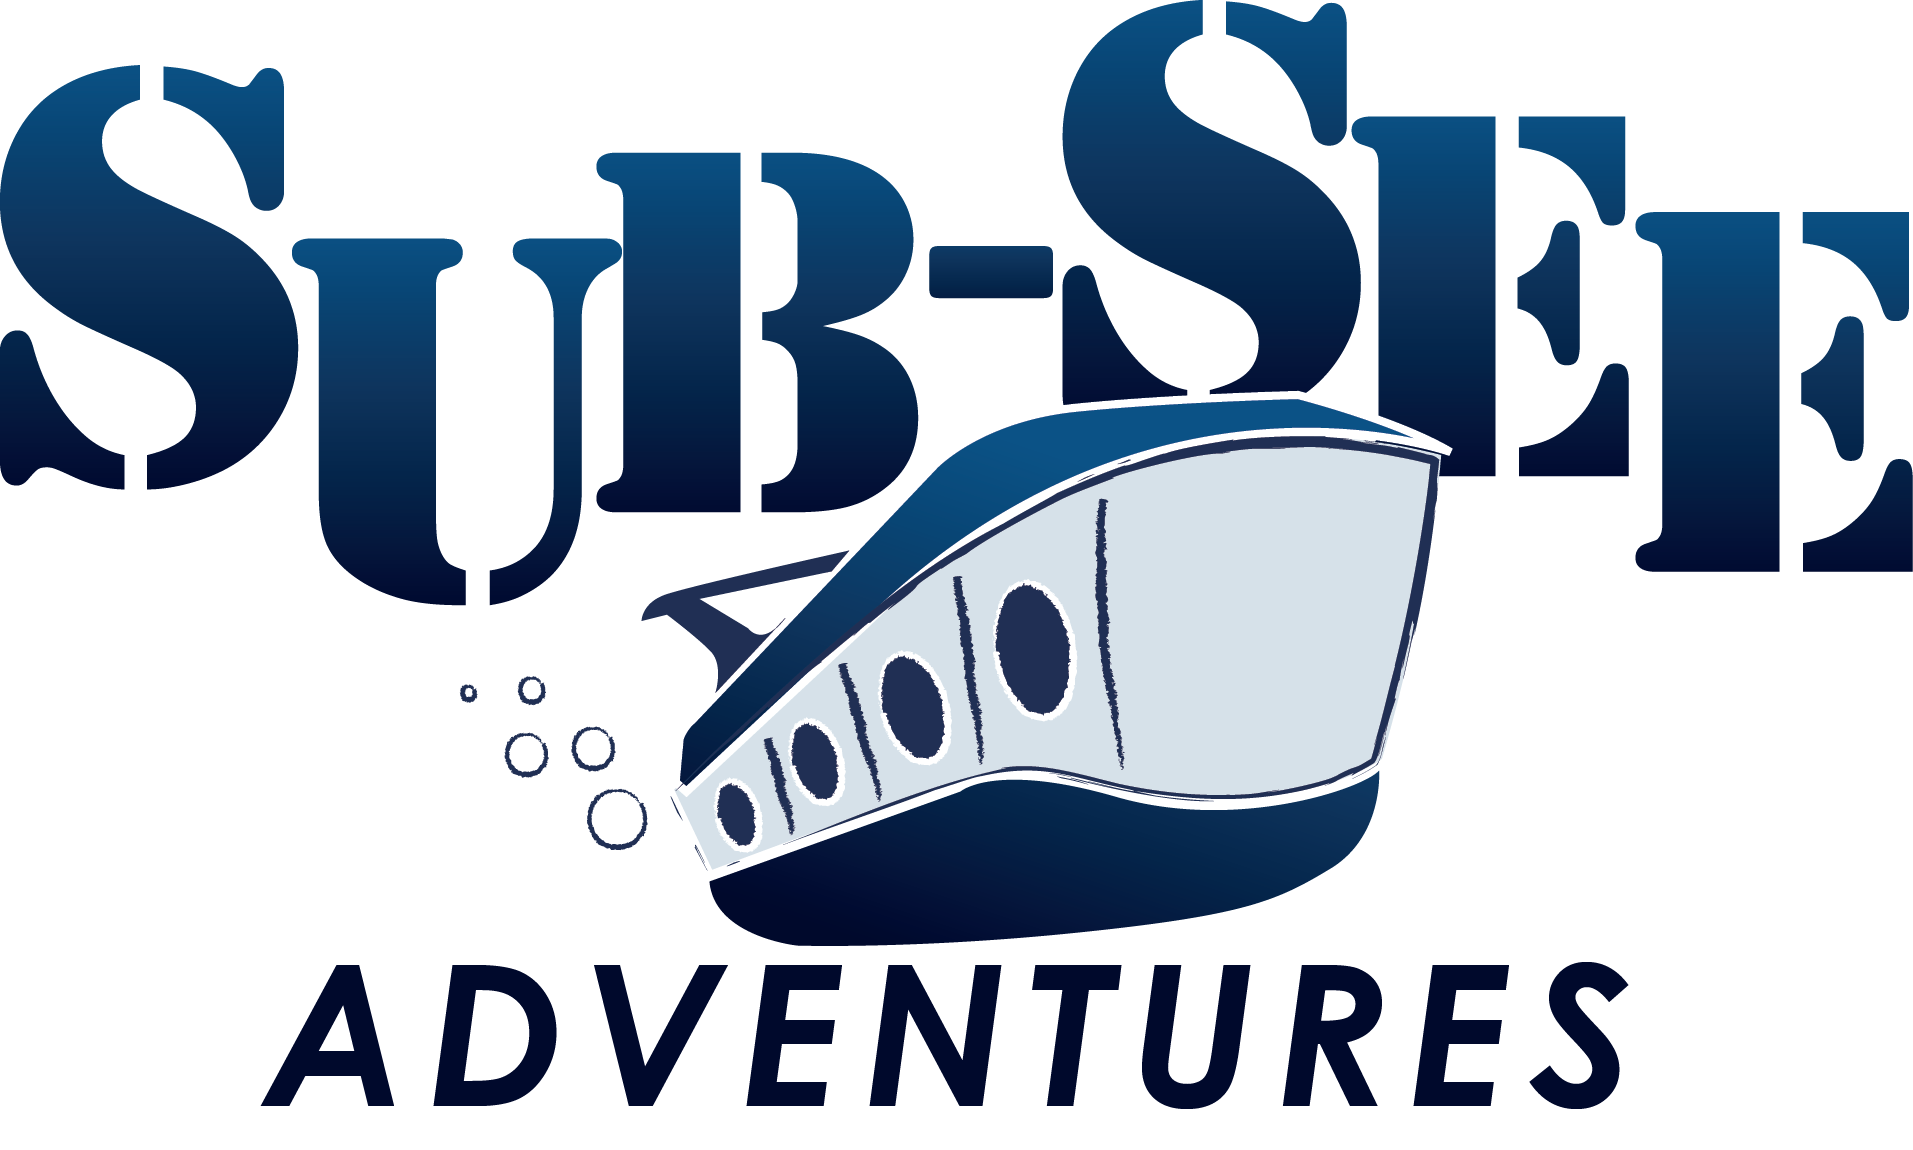 SubSee-logo.png